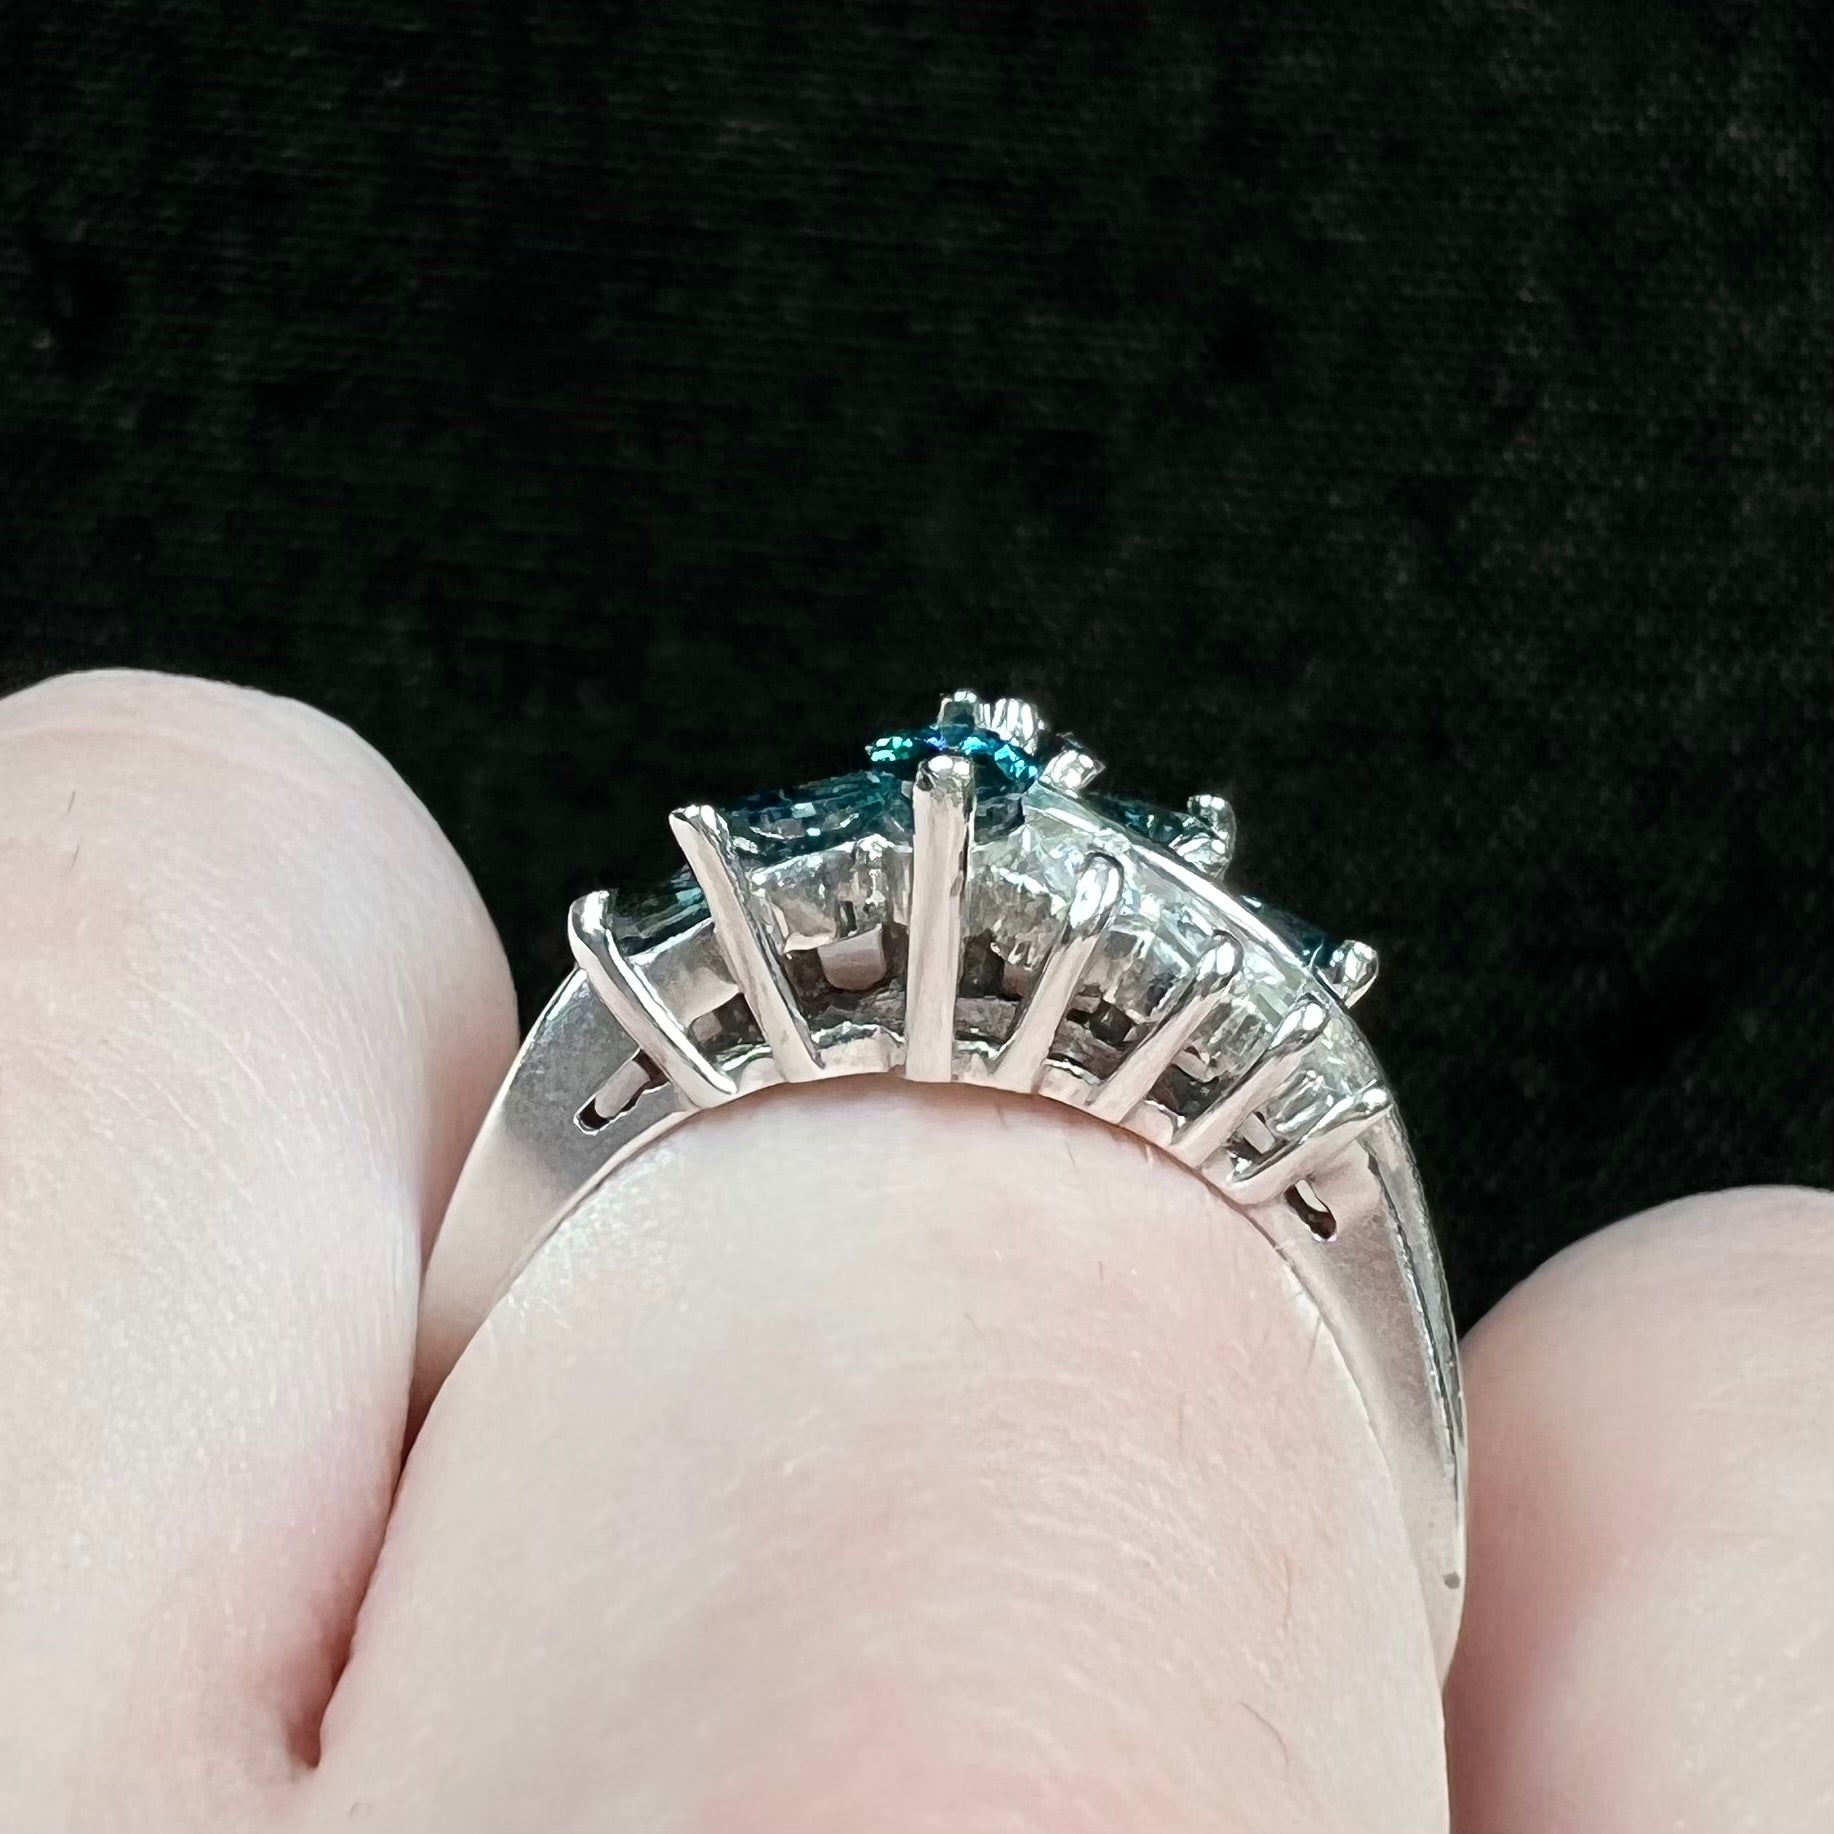 A white gold diamond cluster ring set with blue marquise cut and white round cut diamonds.